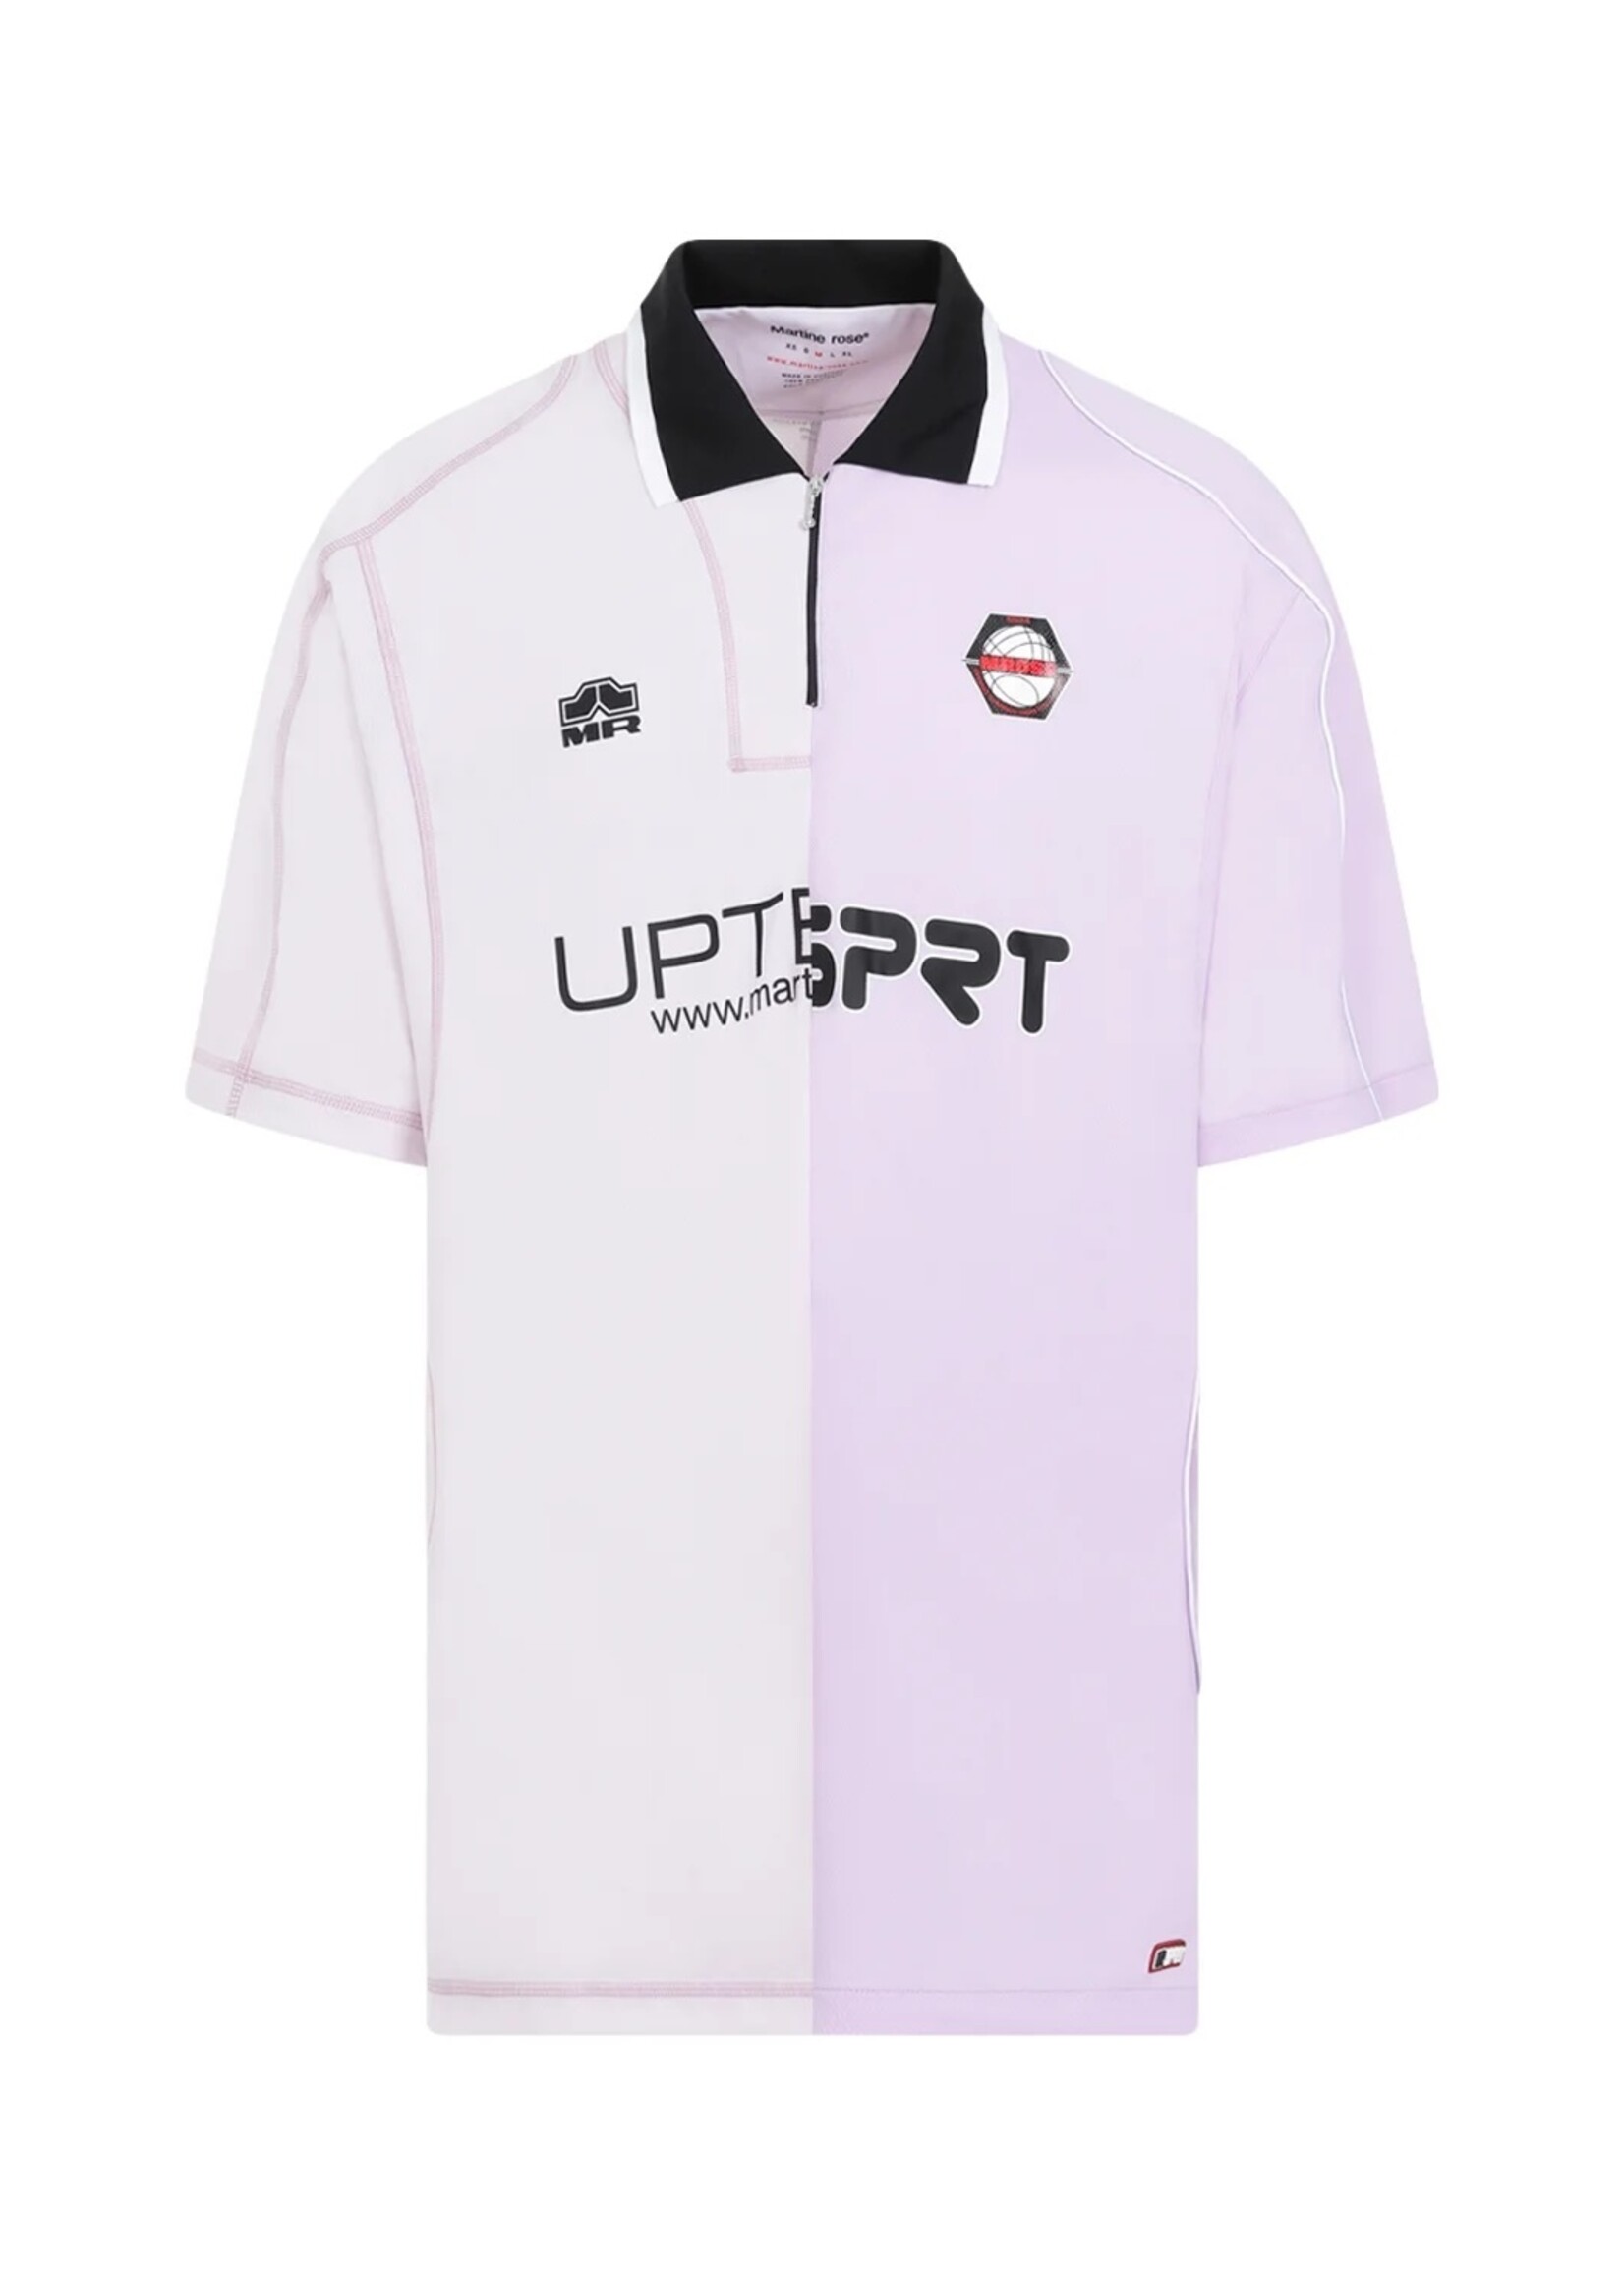 MARTINE ROSE Half and Half Football Top in Lilac